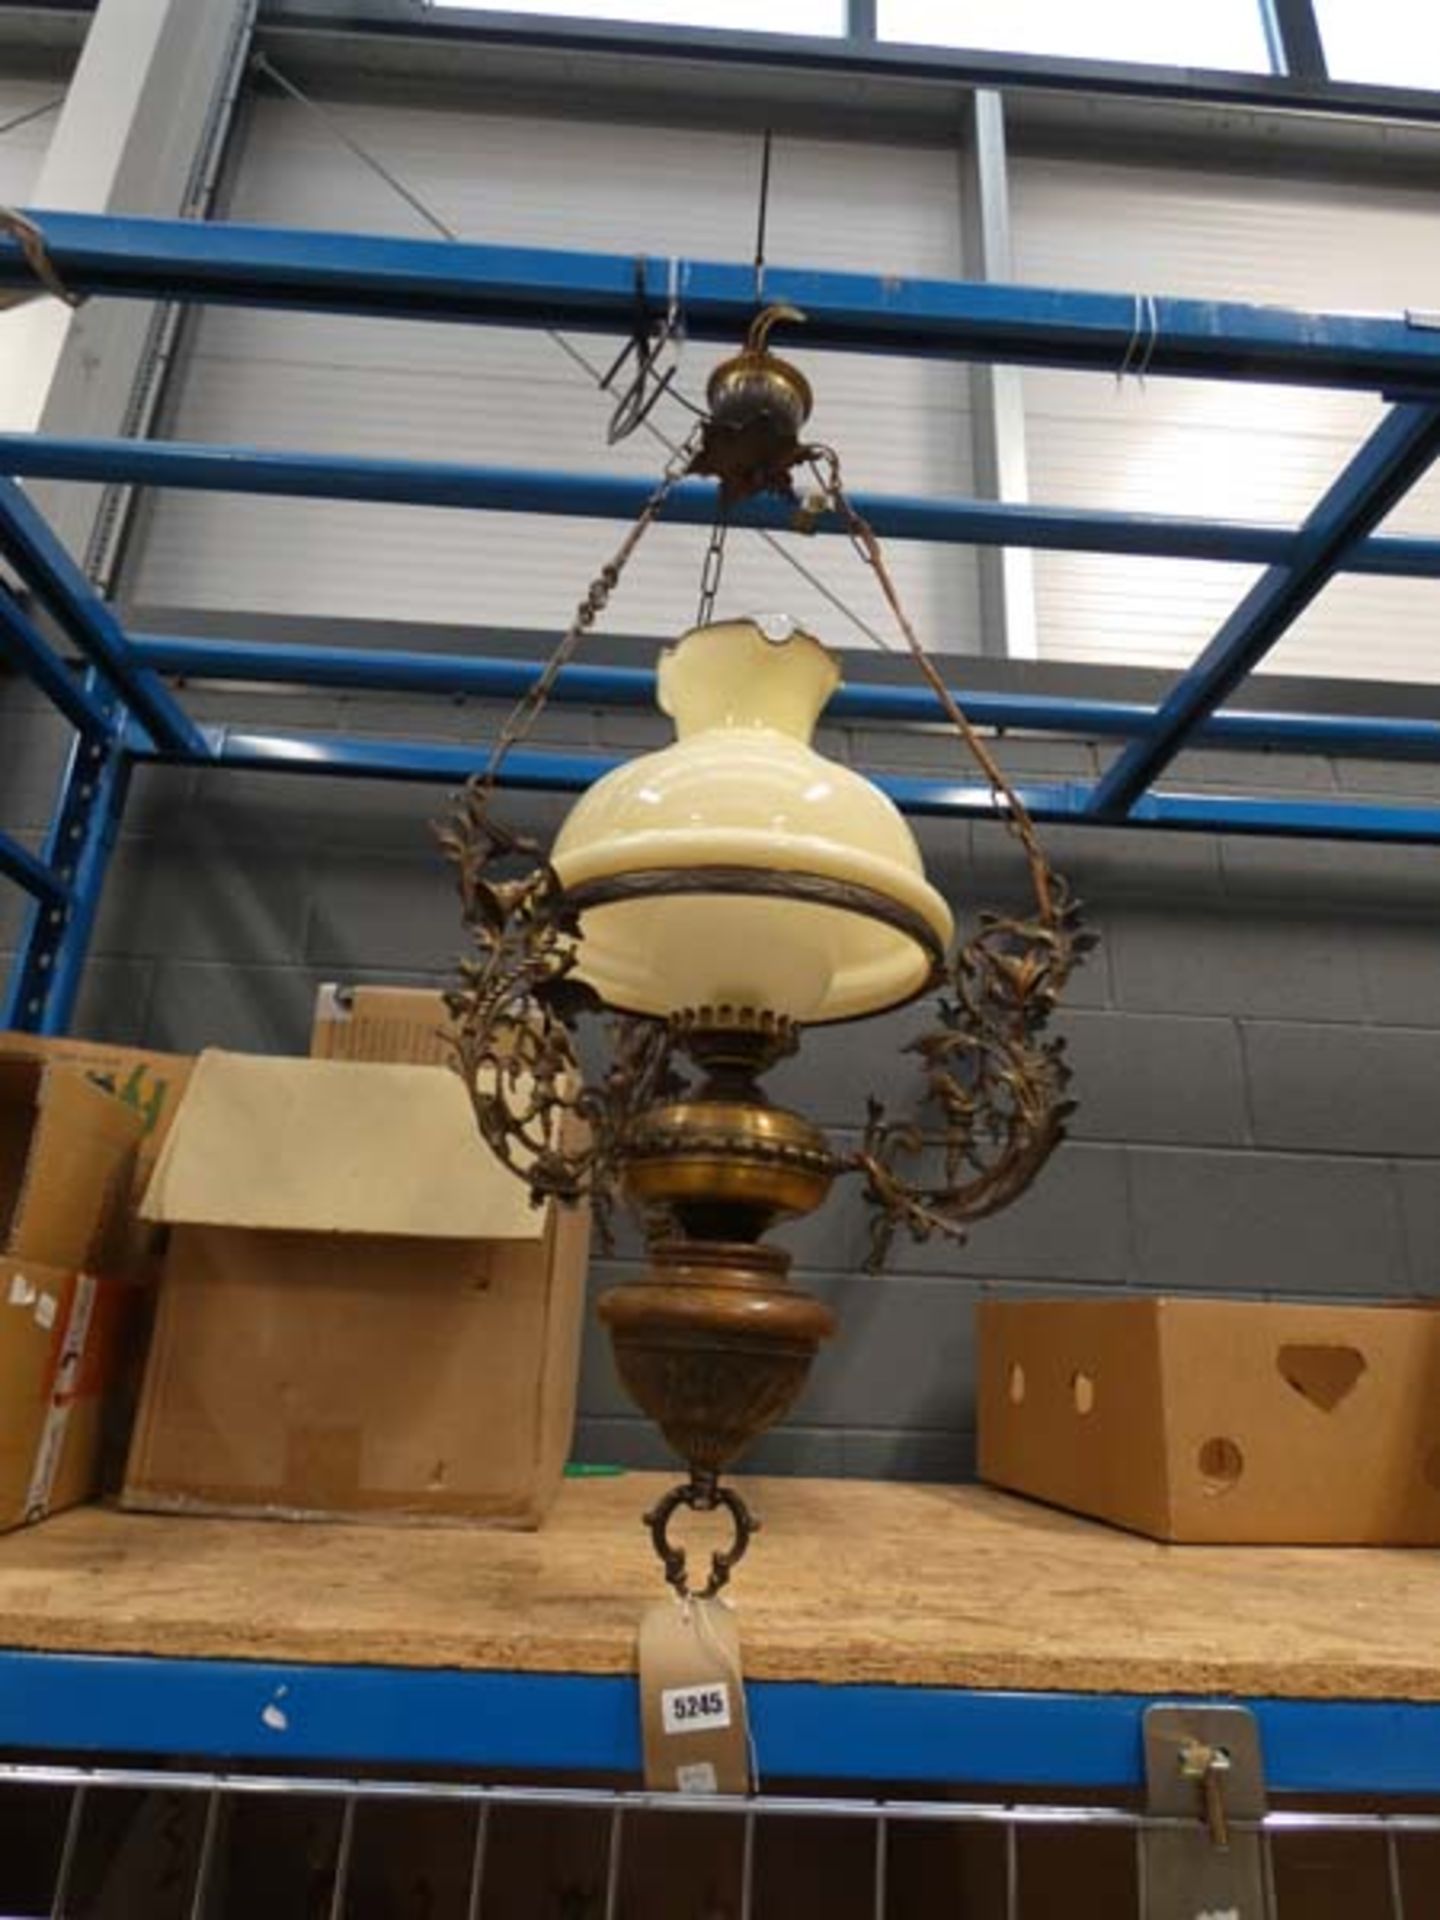 (5) A Colonial-style ceiling light